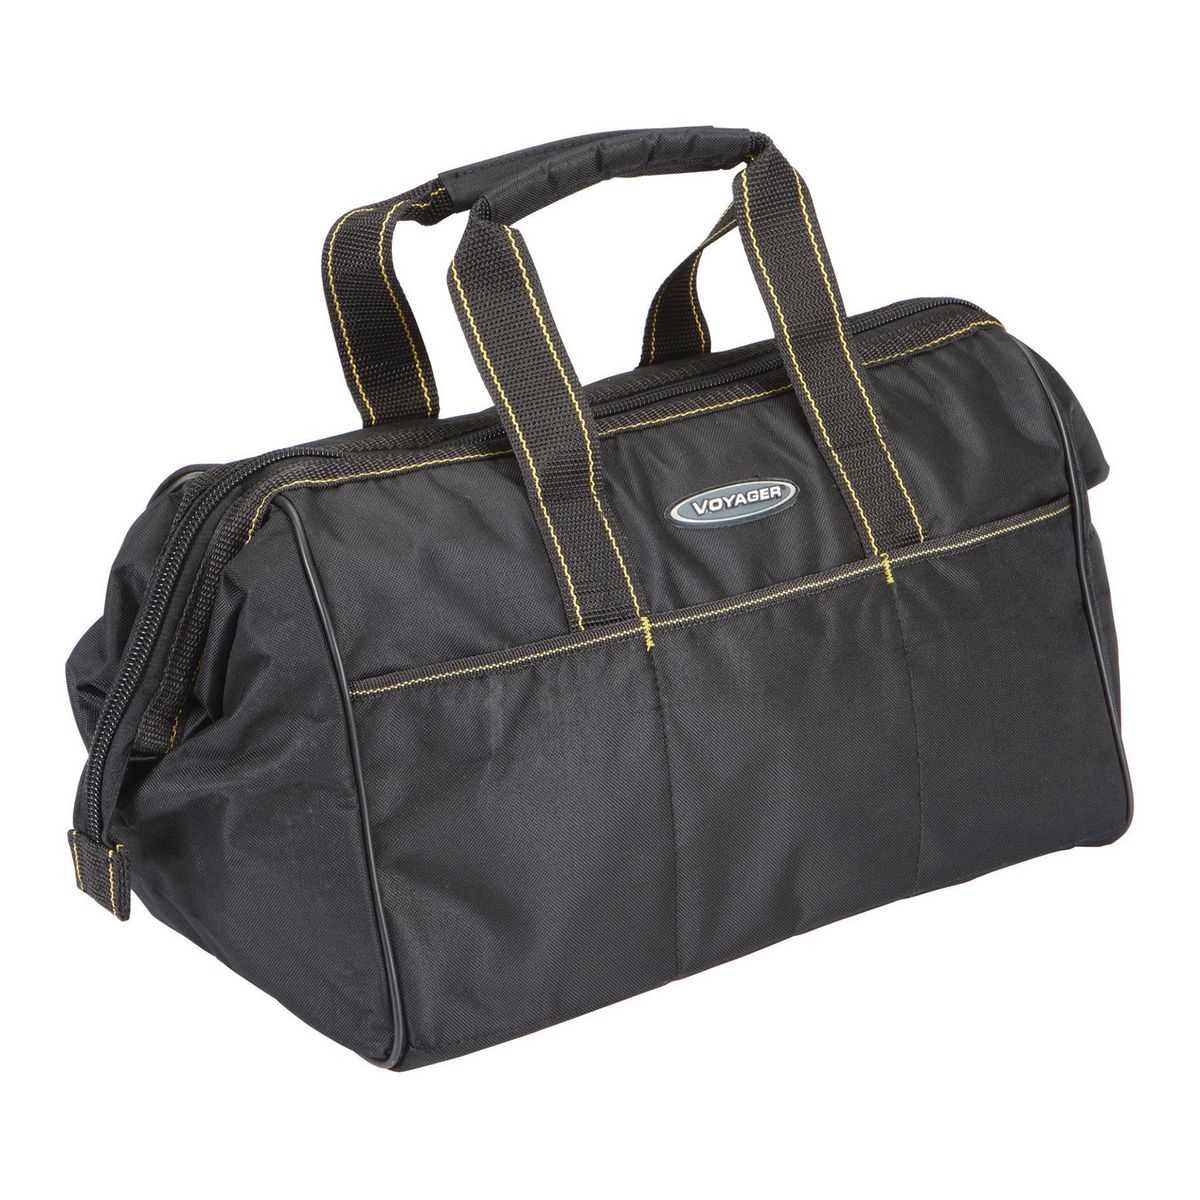 VOYAGER 15 in. Tool Bag with 14 Pockets - Item 61469 / 62341 / 62348 / 94993